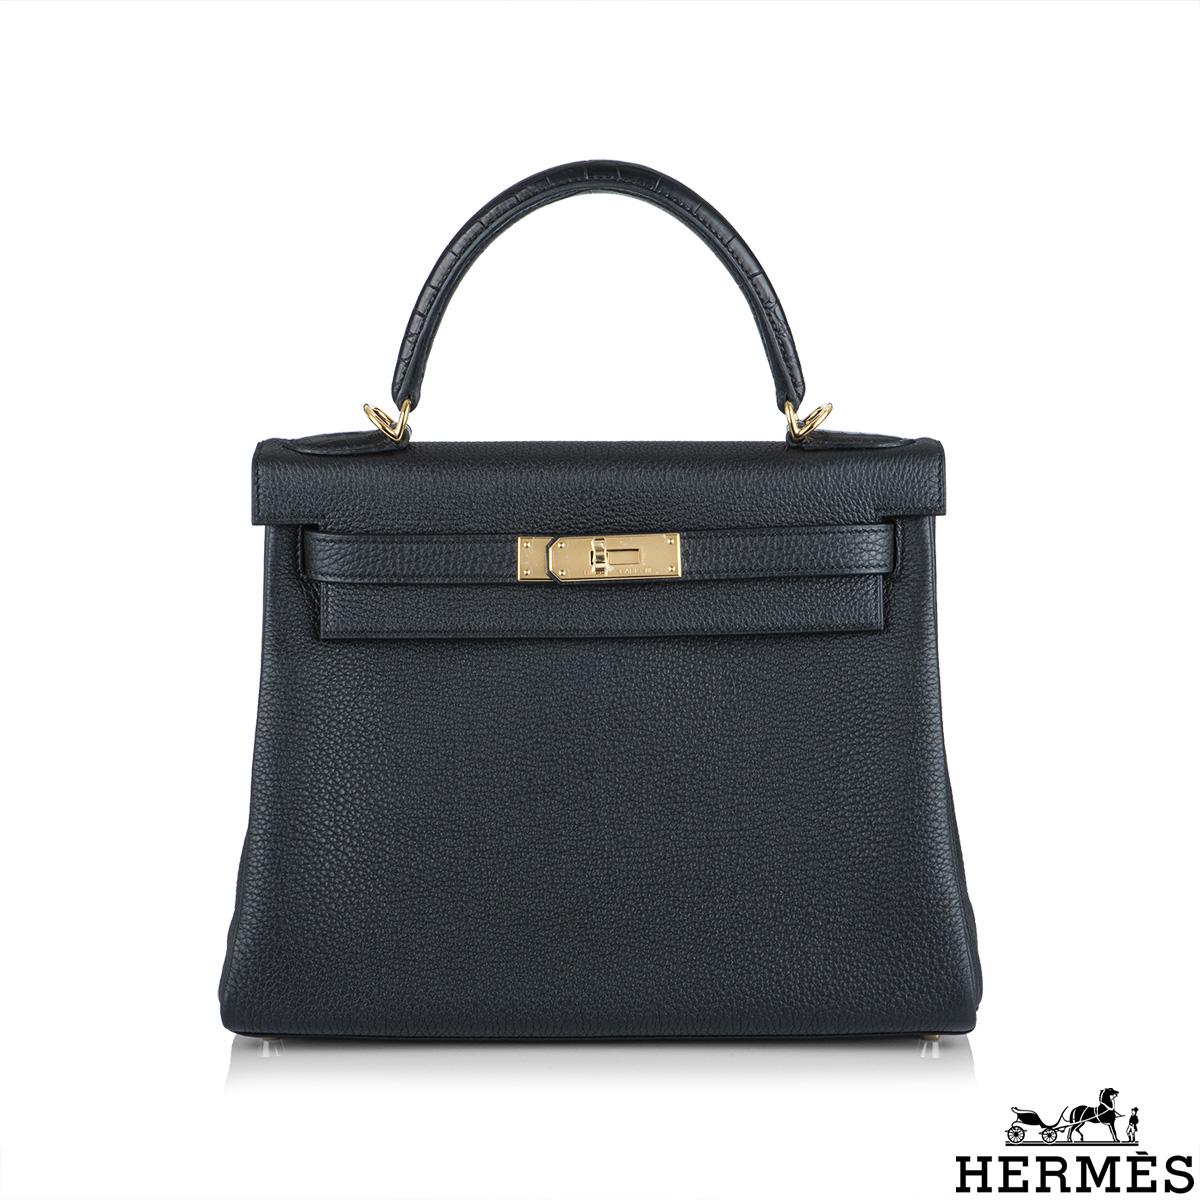 An unworn limited edition Hermès Touch kelly 28 cm bag. The exterior of this Kelly 